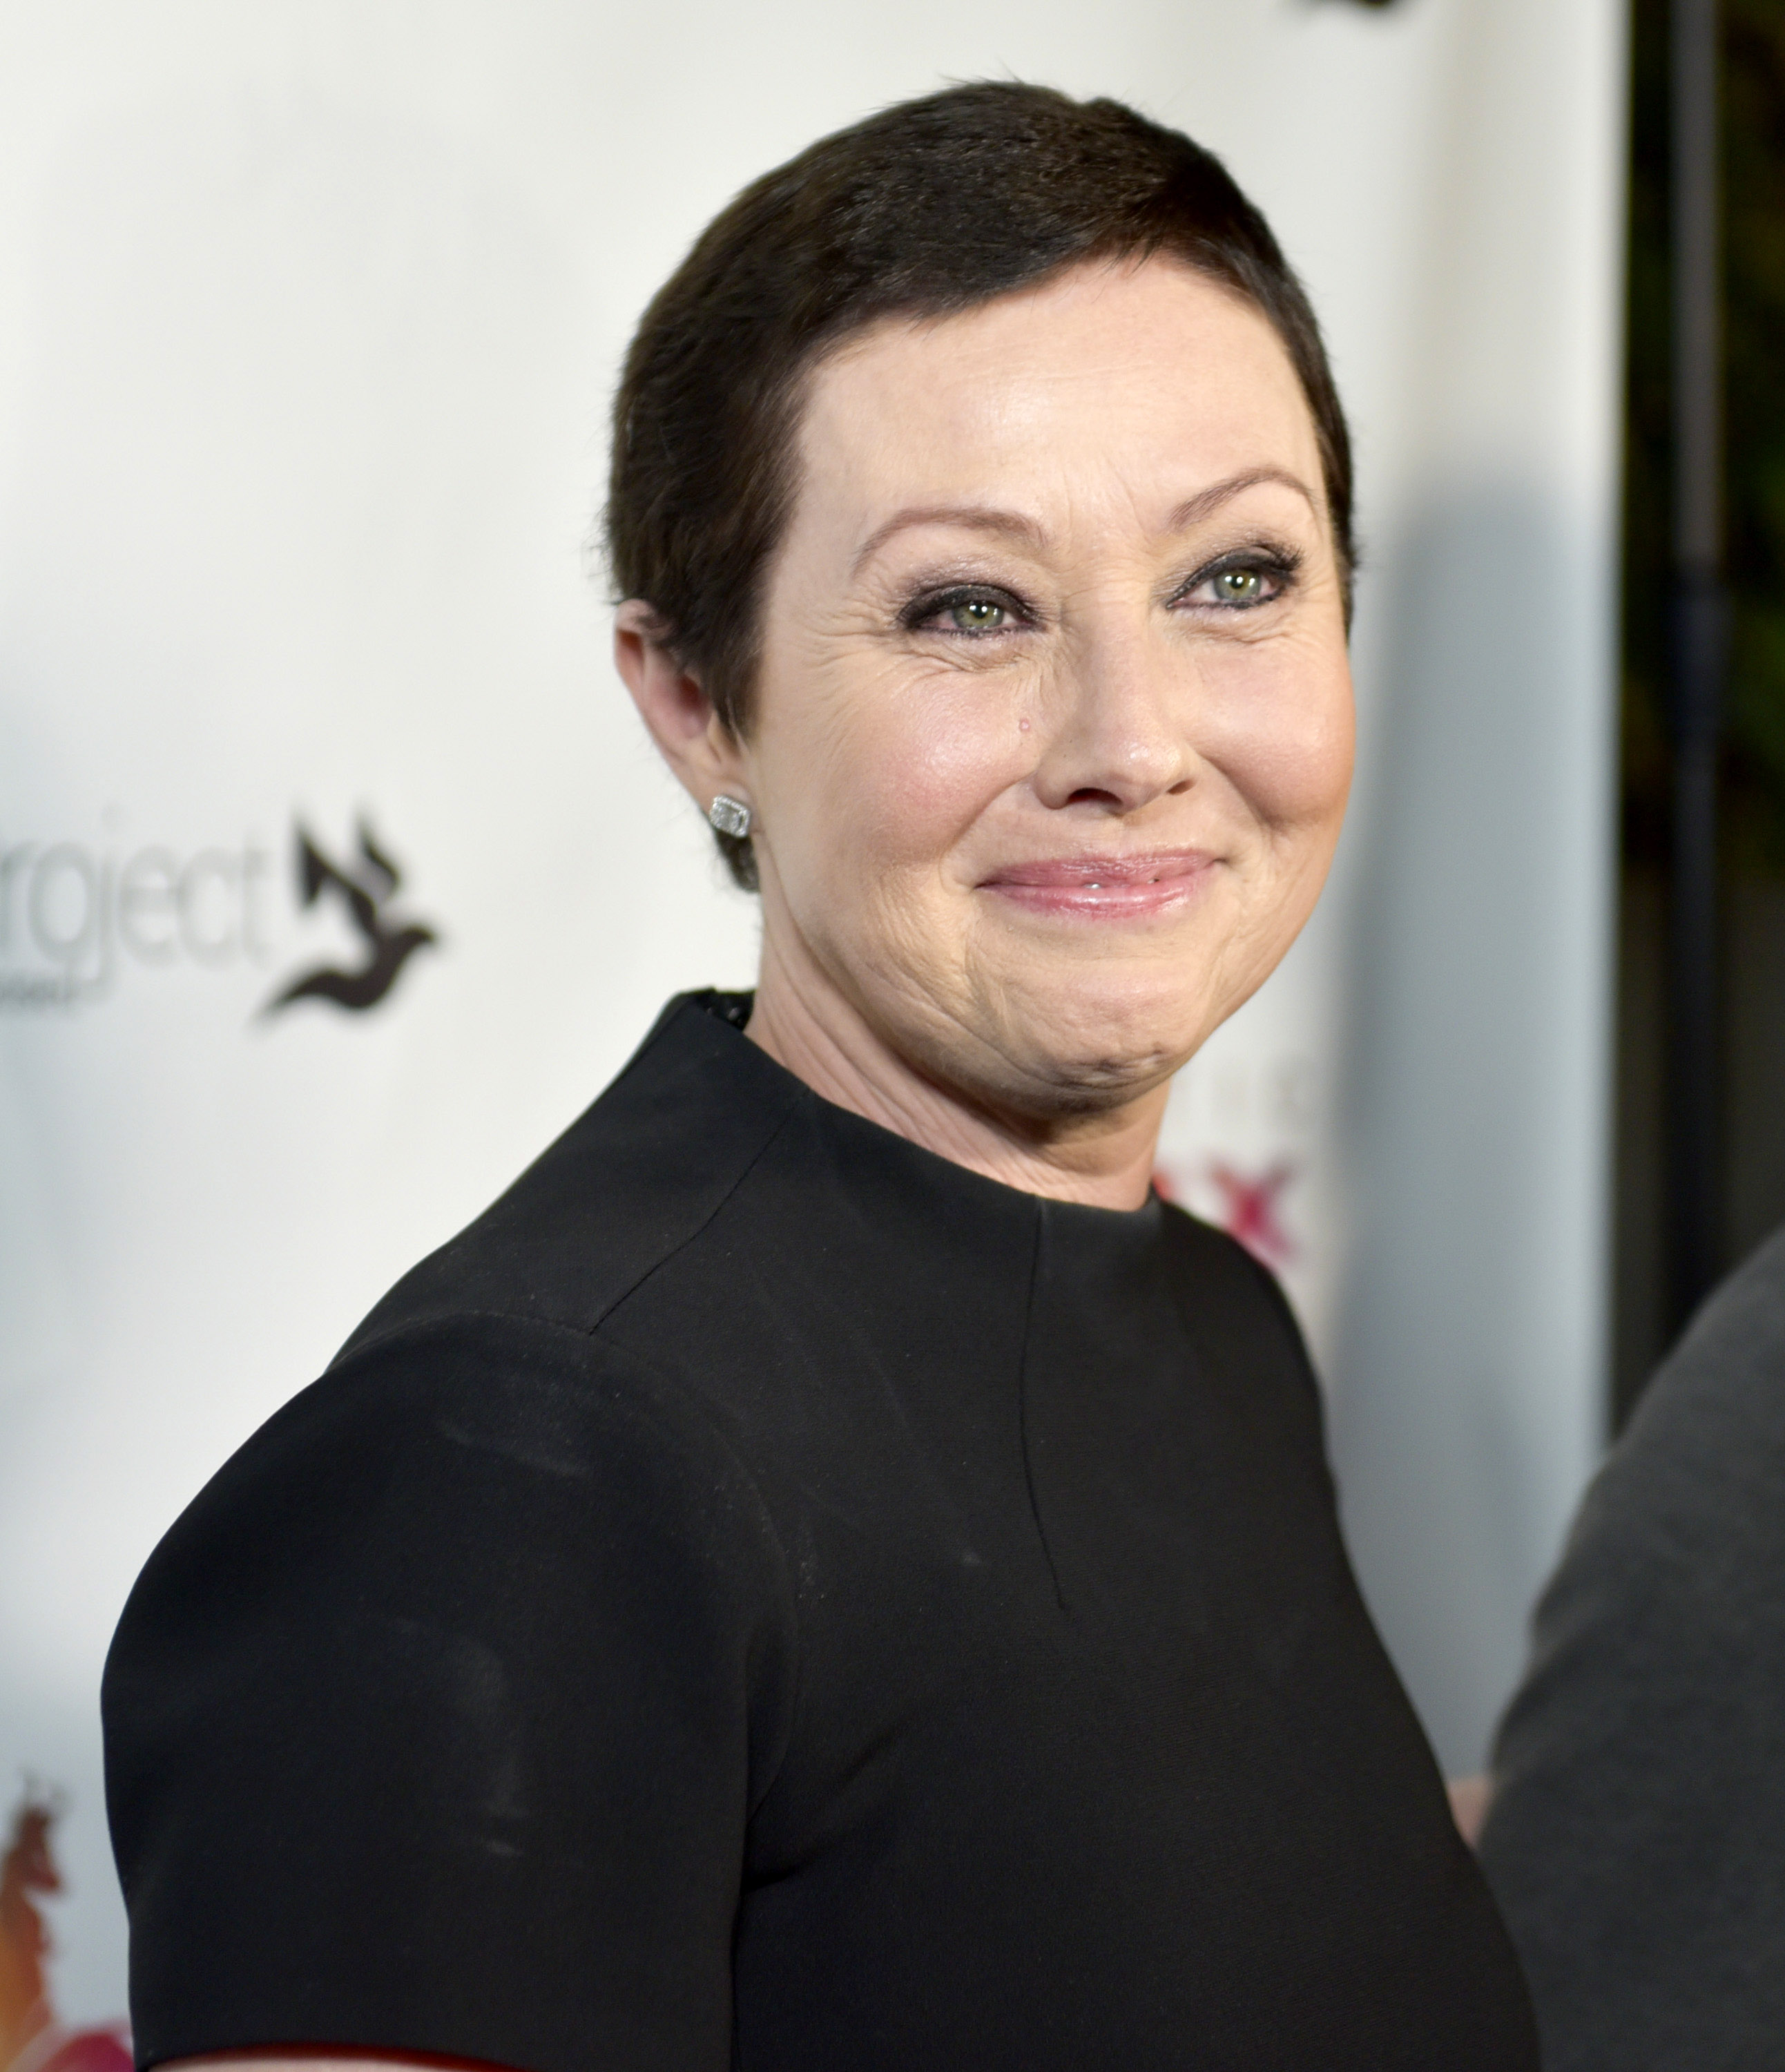 Shannen Doherty's Cancer Is Still in Remission Despite Elevated Tumor